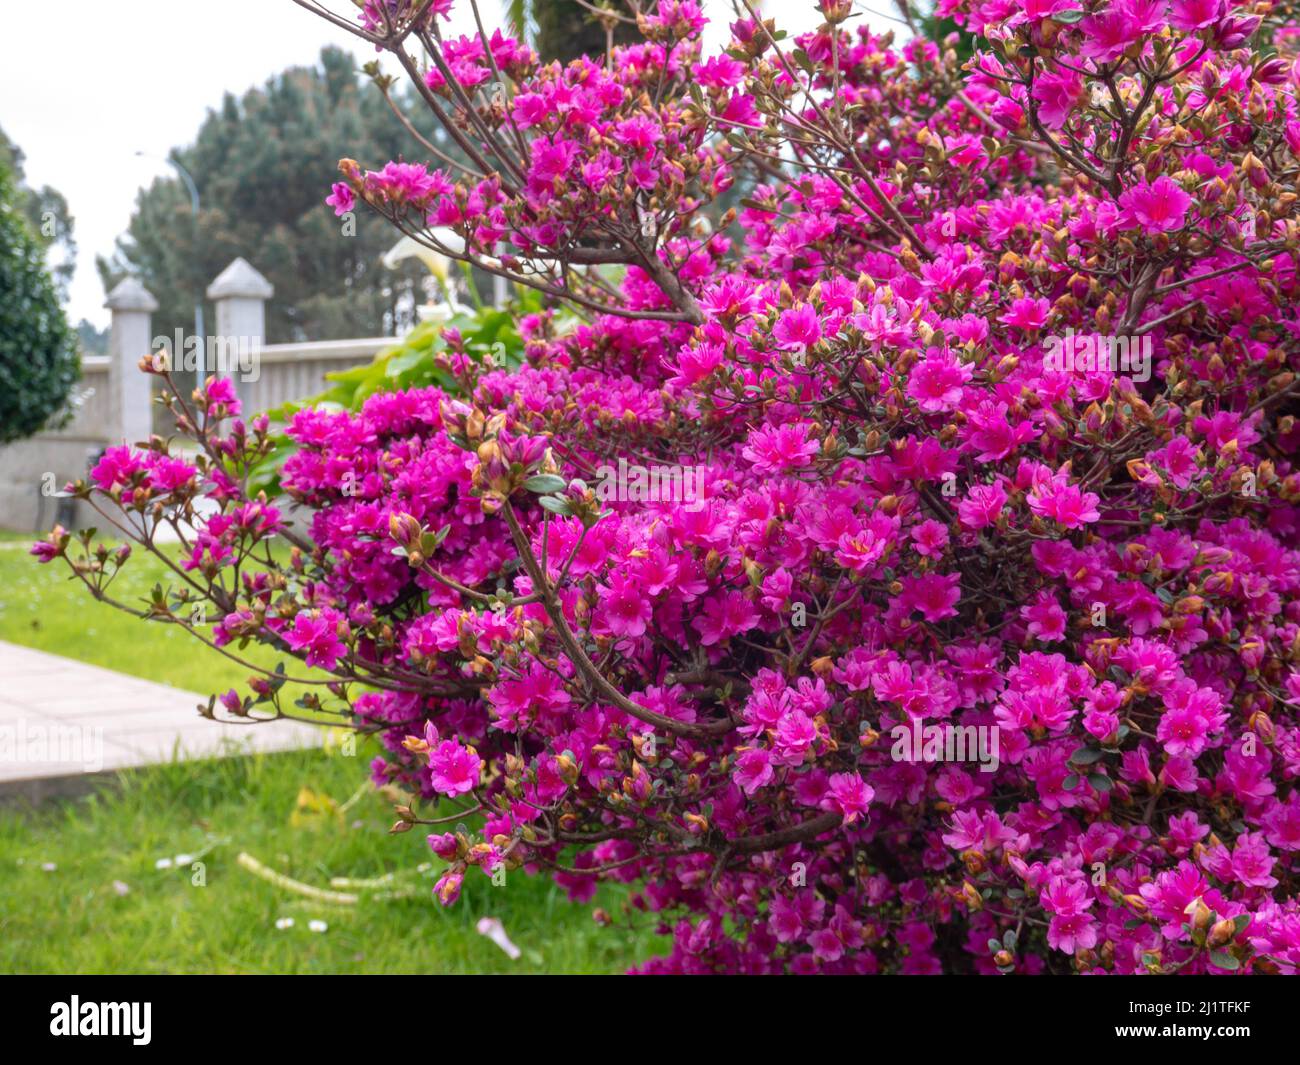 Azalea plant covered with bright pink flowers in the garden. Rhododendron tsutsusi. Stock Photo